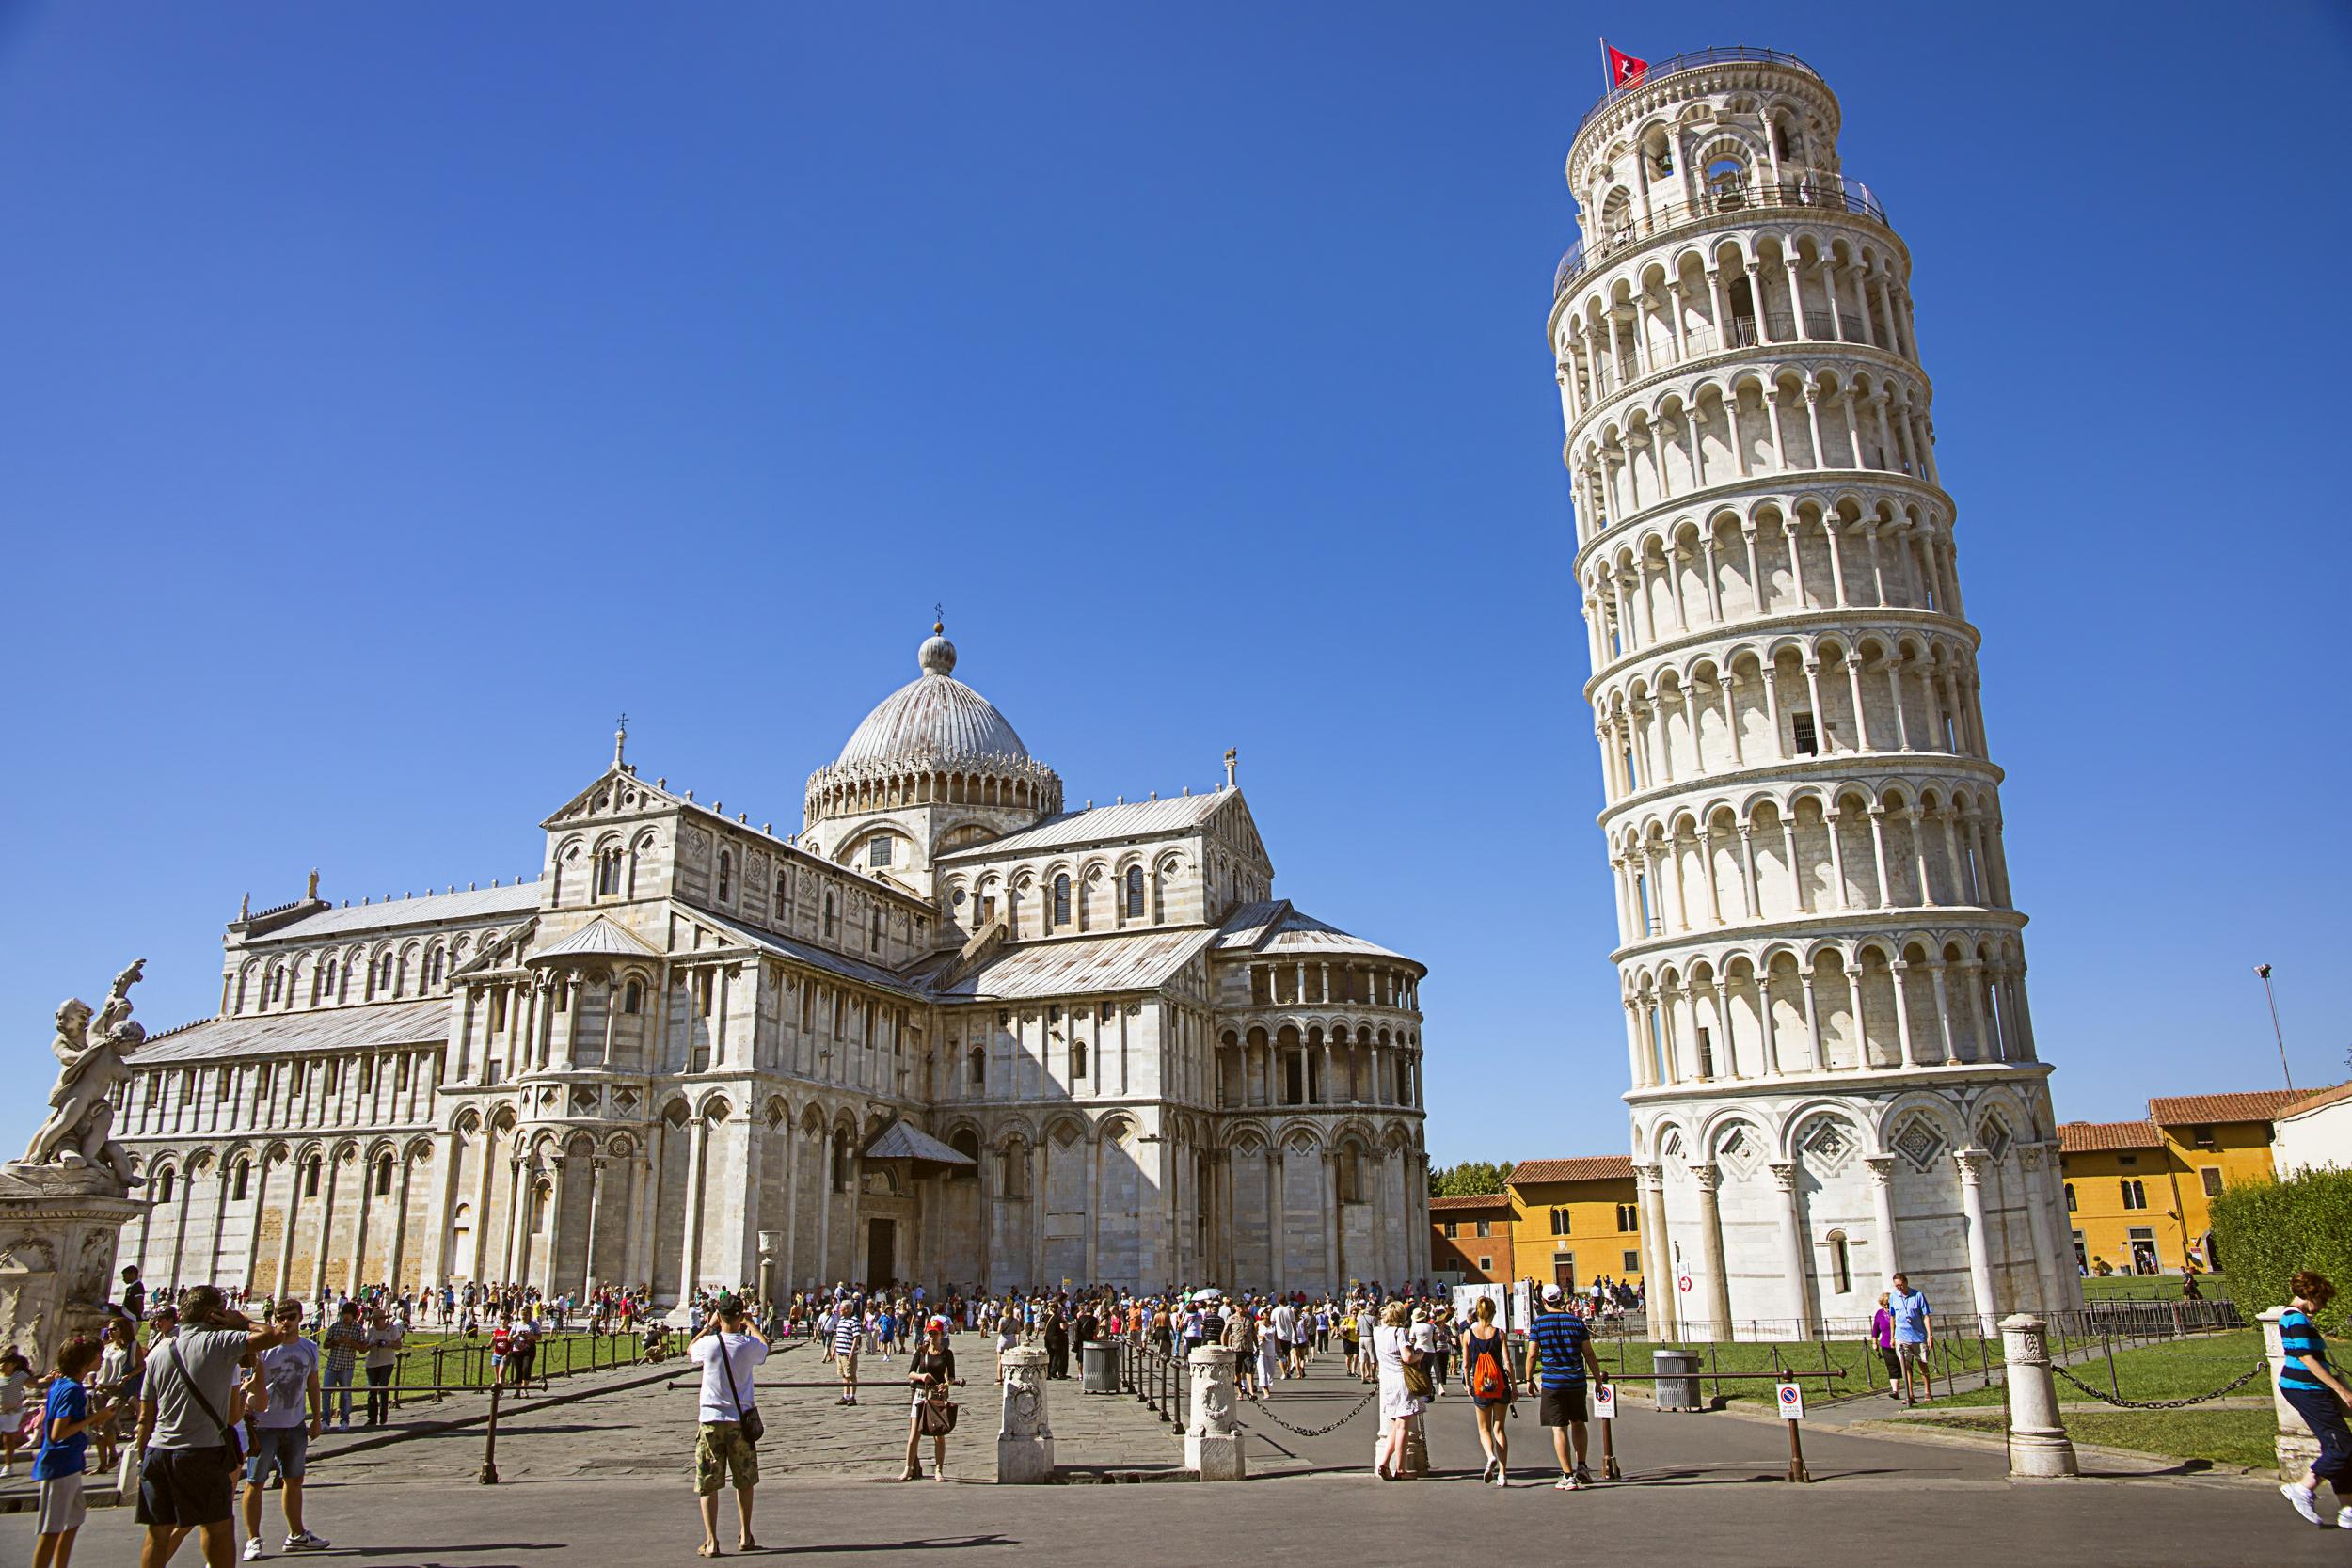 Leaning Tower Of Pisa Straightens Up By 4cm Say Experts The Independent The Independent